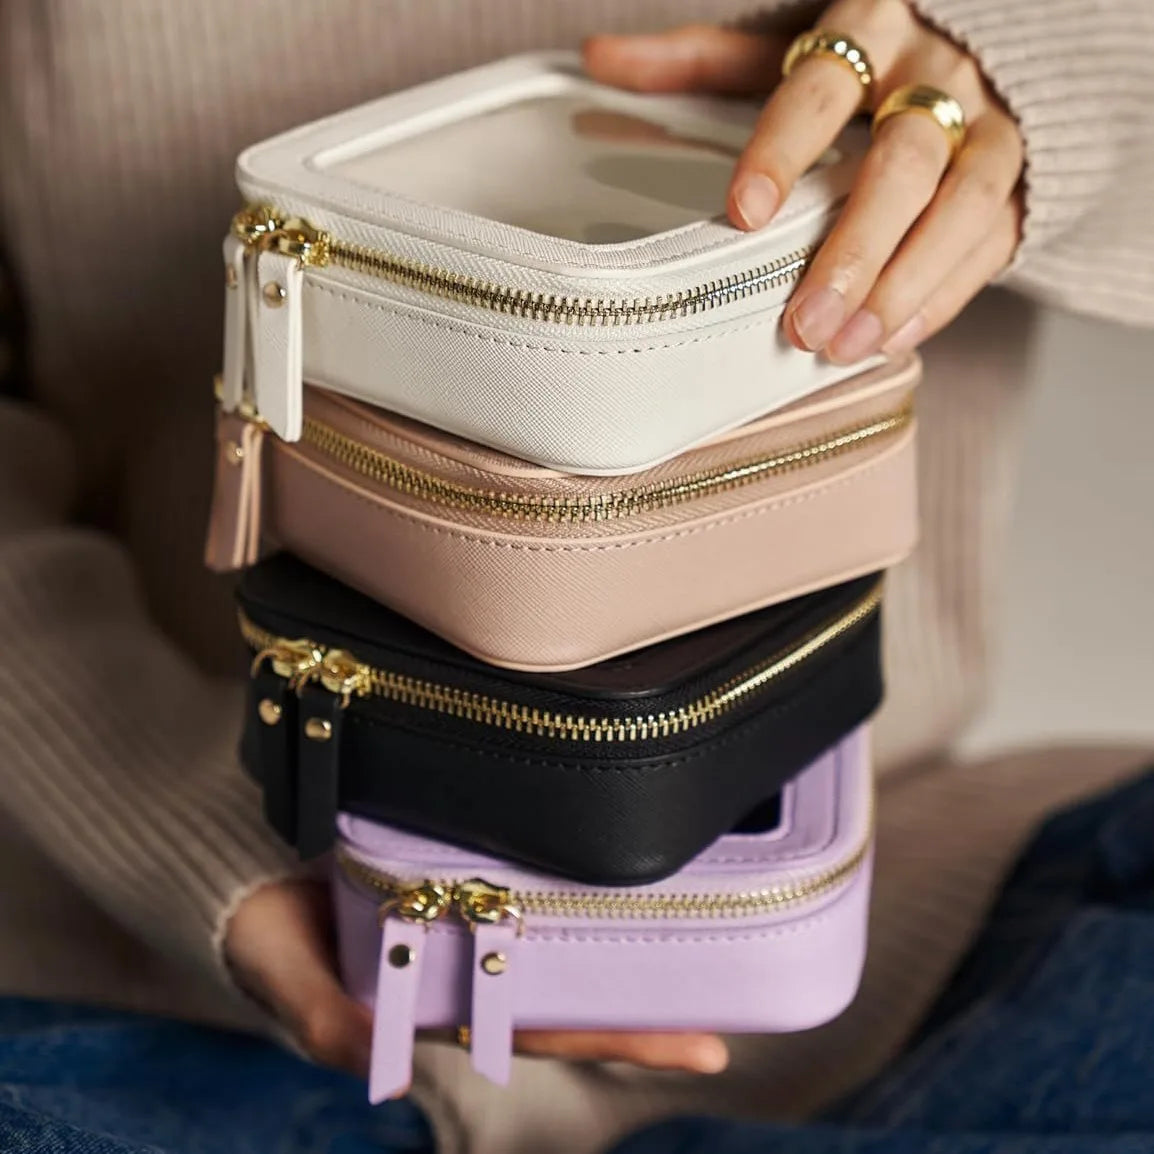 Introducing the Mini Clear Makeup Bag—crafted from PU Saffiano vegan faux leather, perfect for storing lipsticks and cosmetics in your purse.